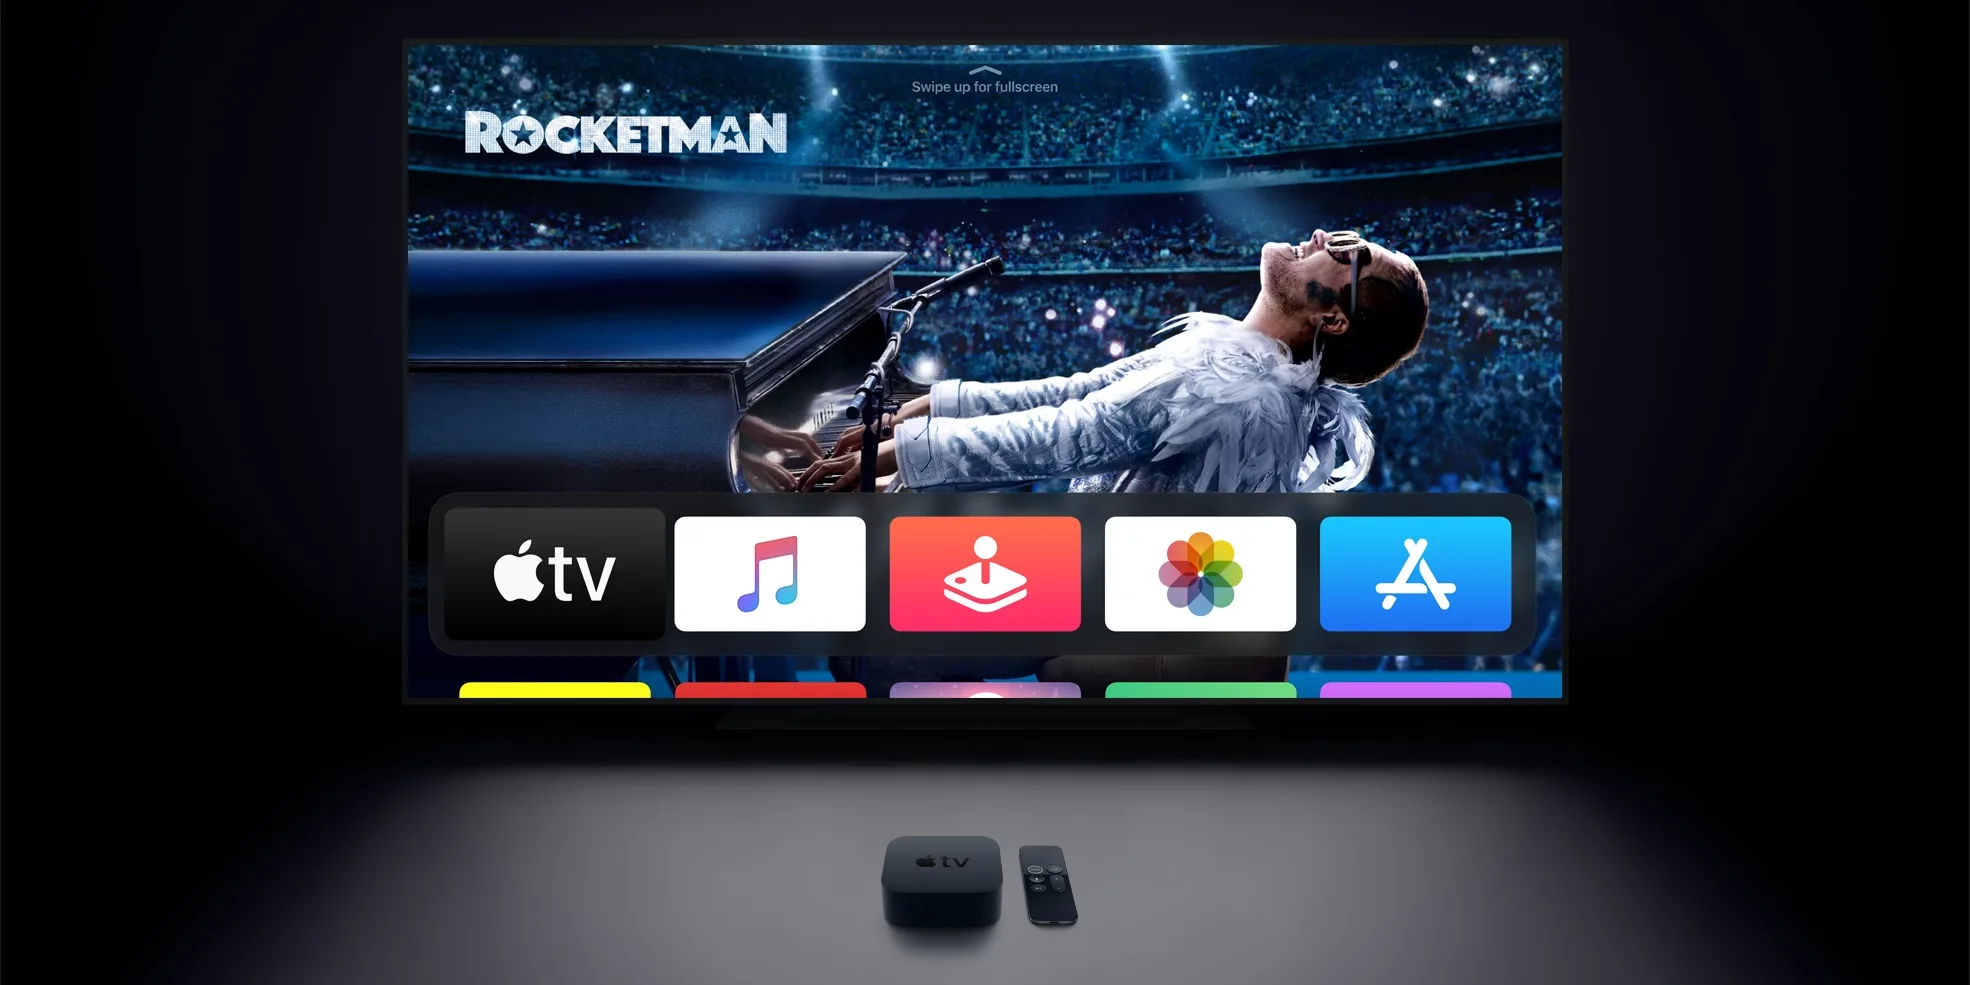 Why Does Apple TV Always Start From the Beginning?